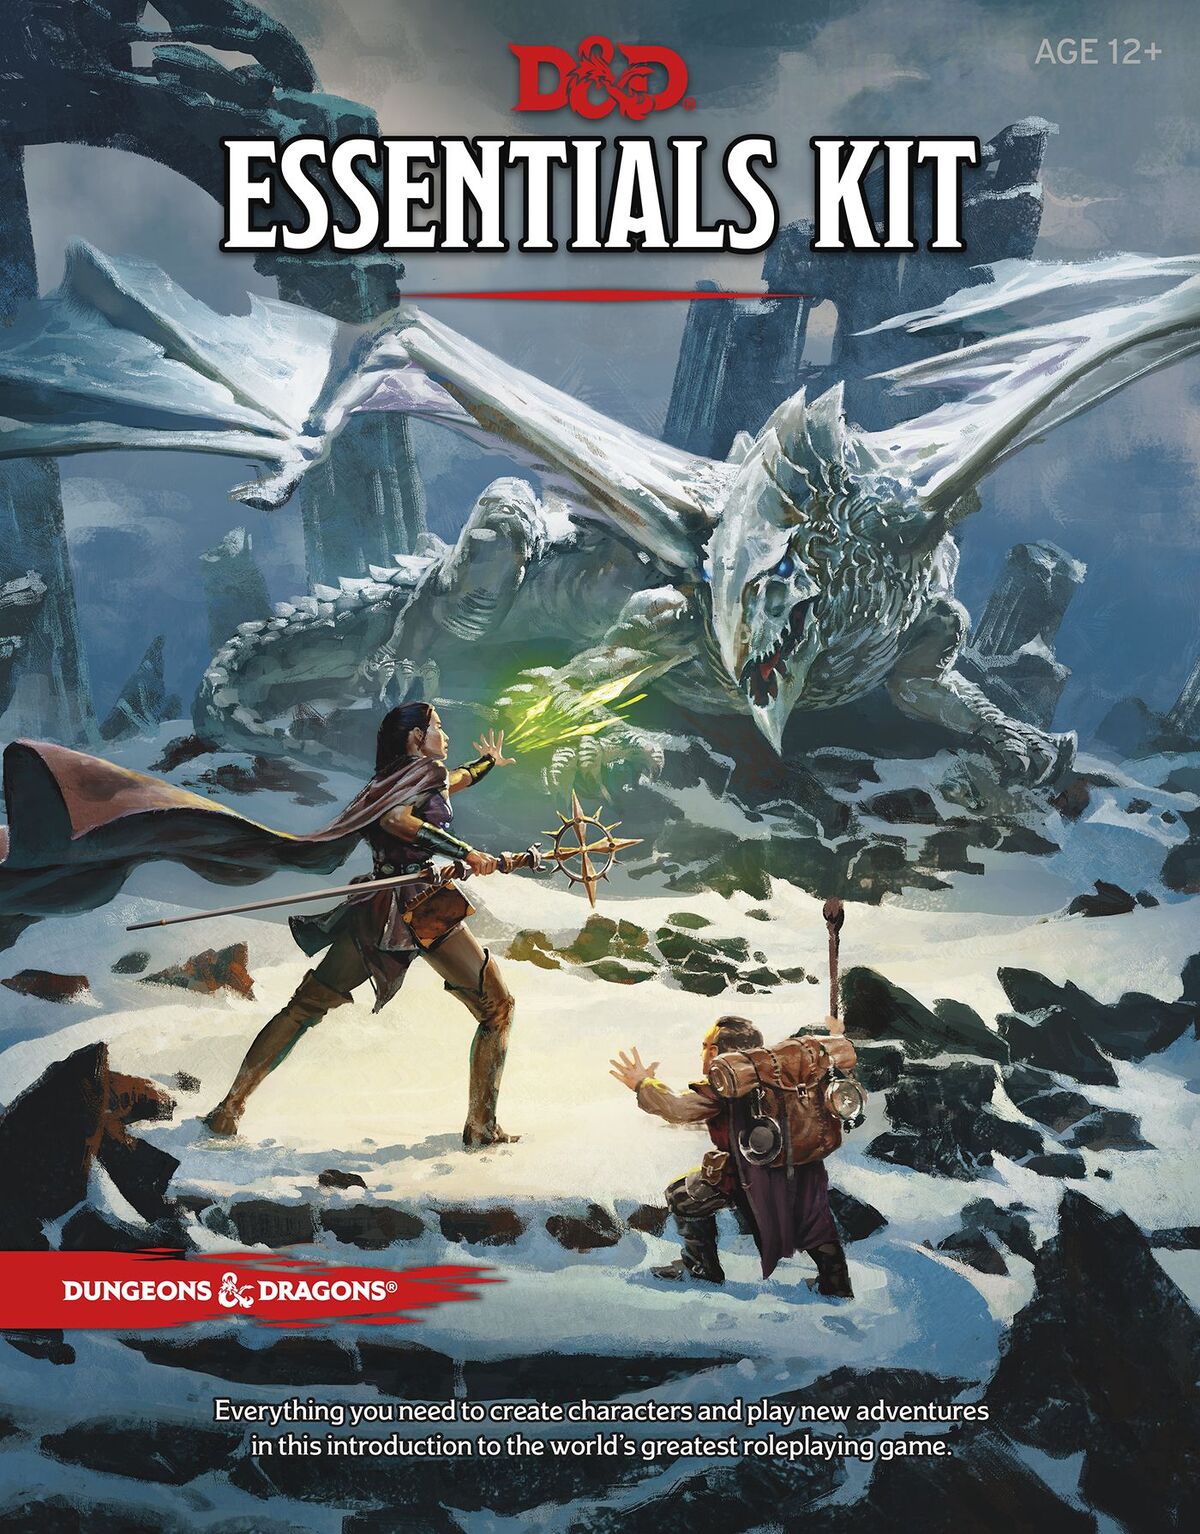 D&D Essentials Kit (2019, Wizards of the Coast) -- What's Inside